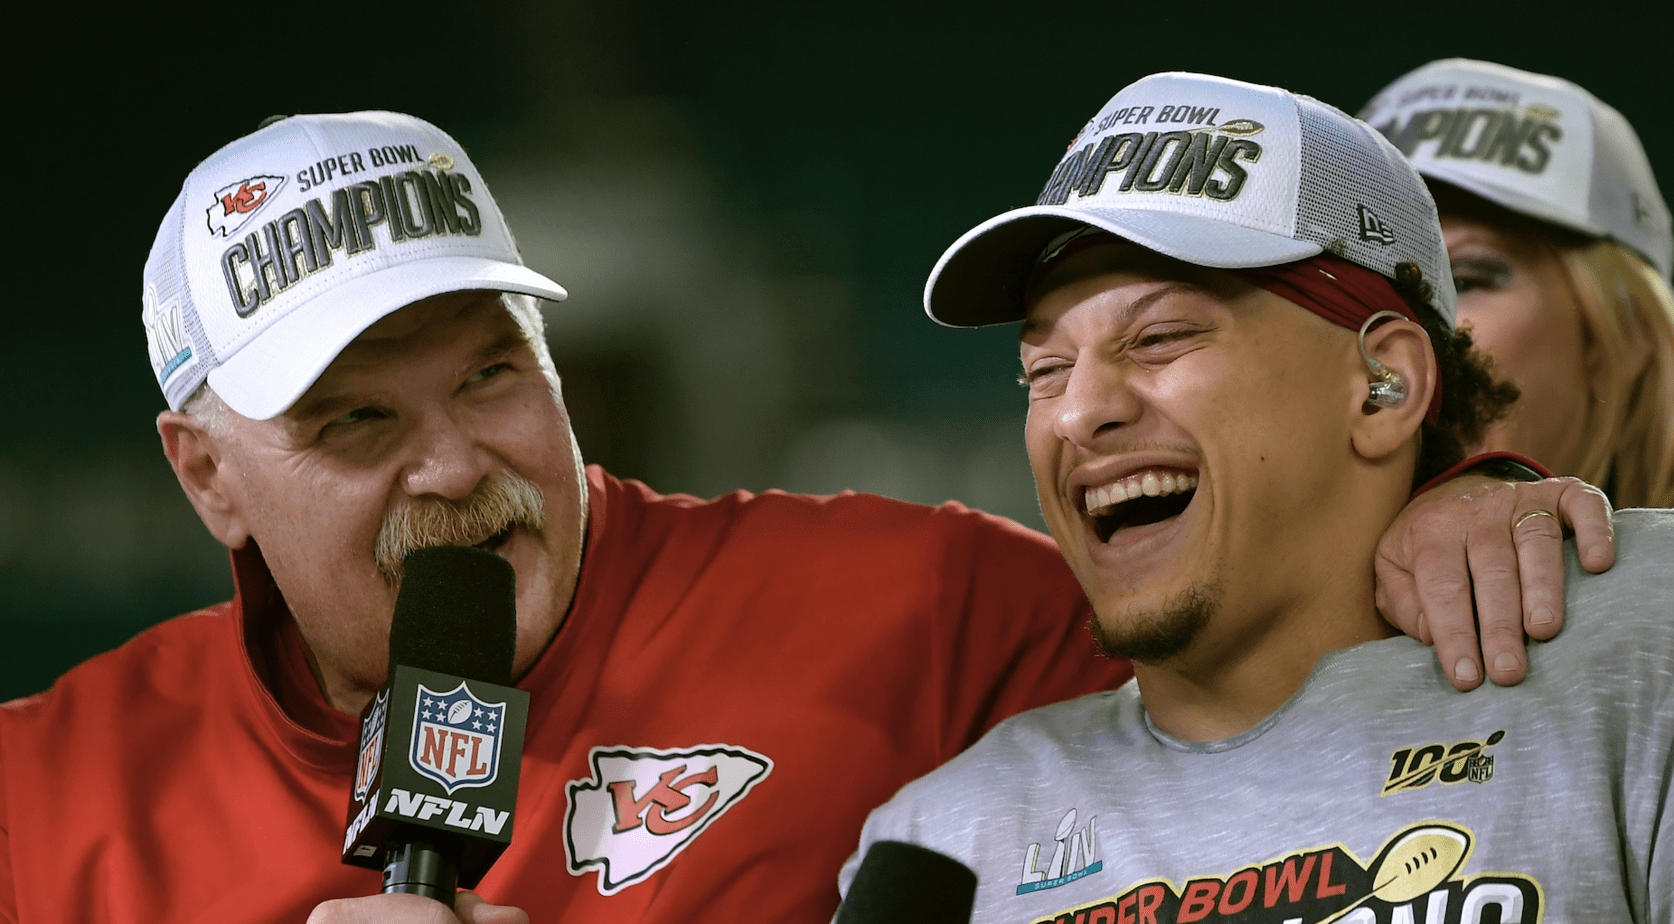 After welcoming his first child into the world recently, Patrick Mahomes has been asking coach Andy Reid to help him get better at changing diapers